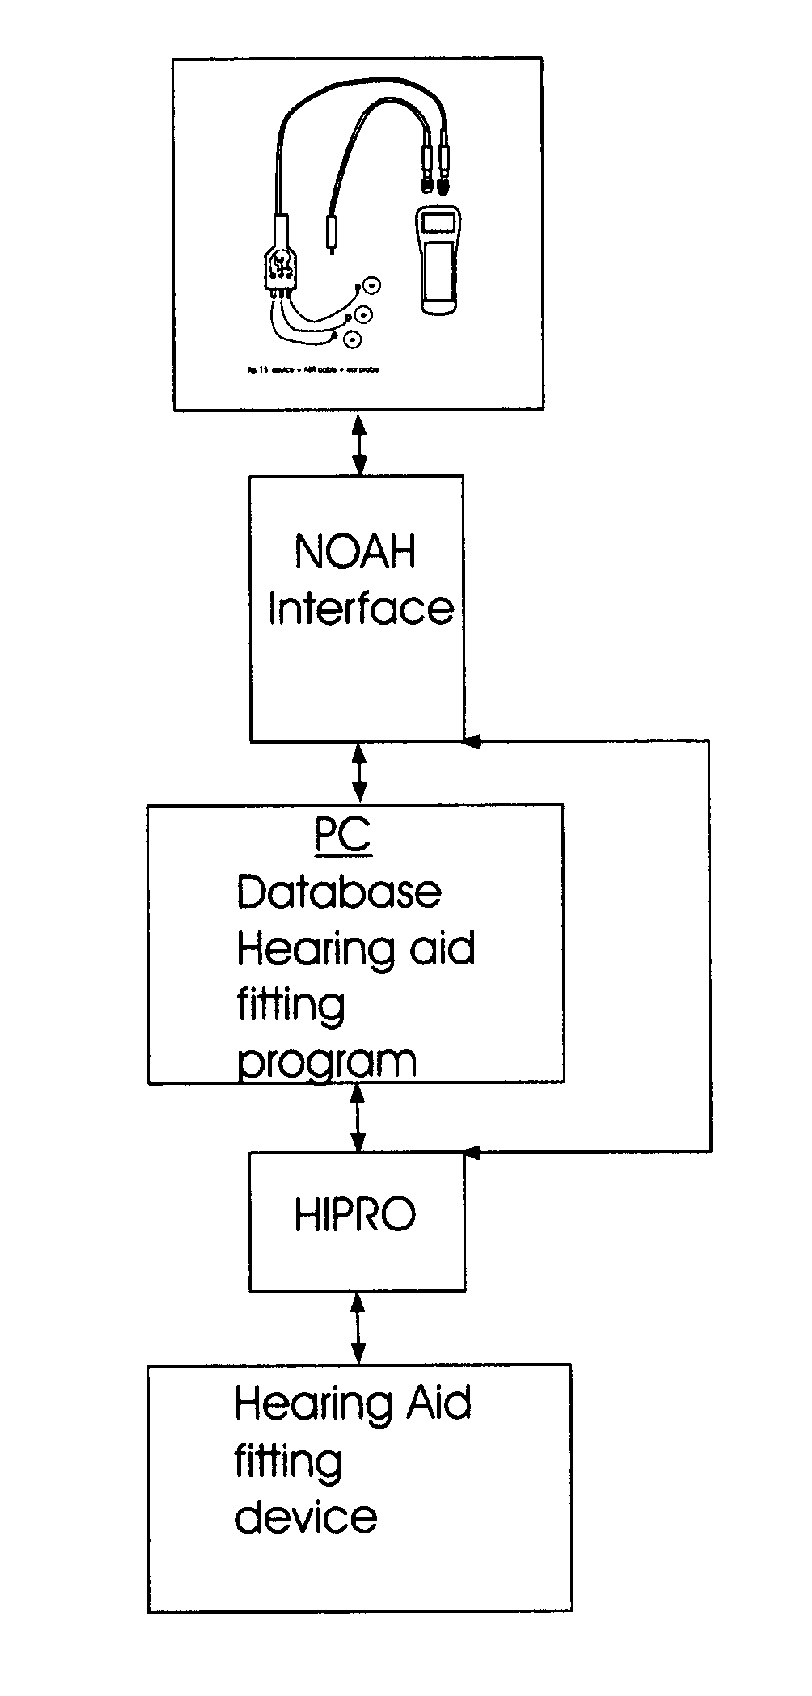 Method for automatic non-cooperative frequency specific assessment of hearing impairment and fitting of hearing aids